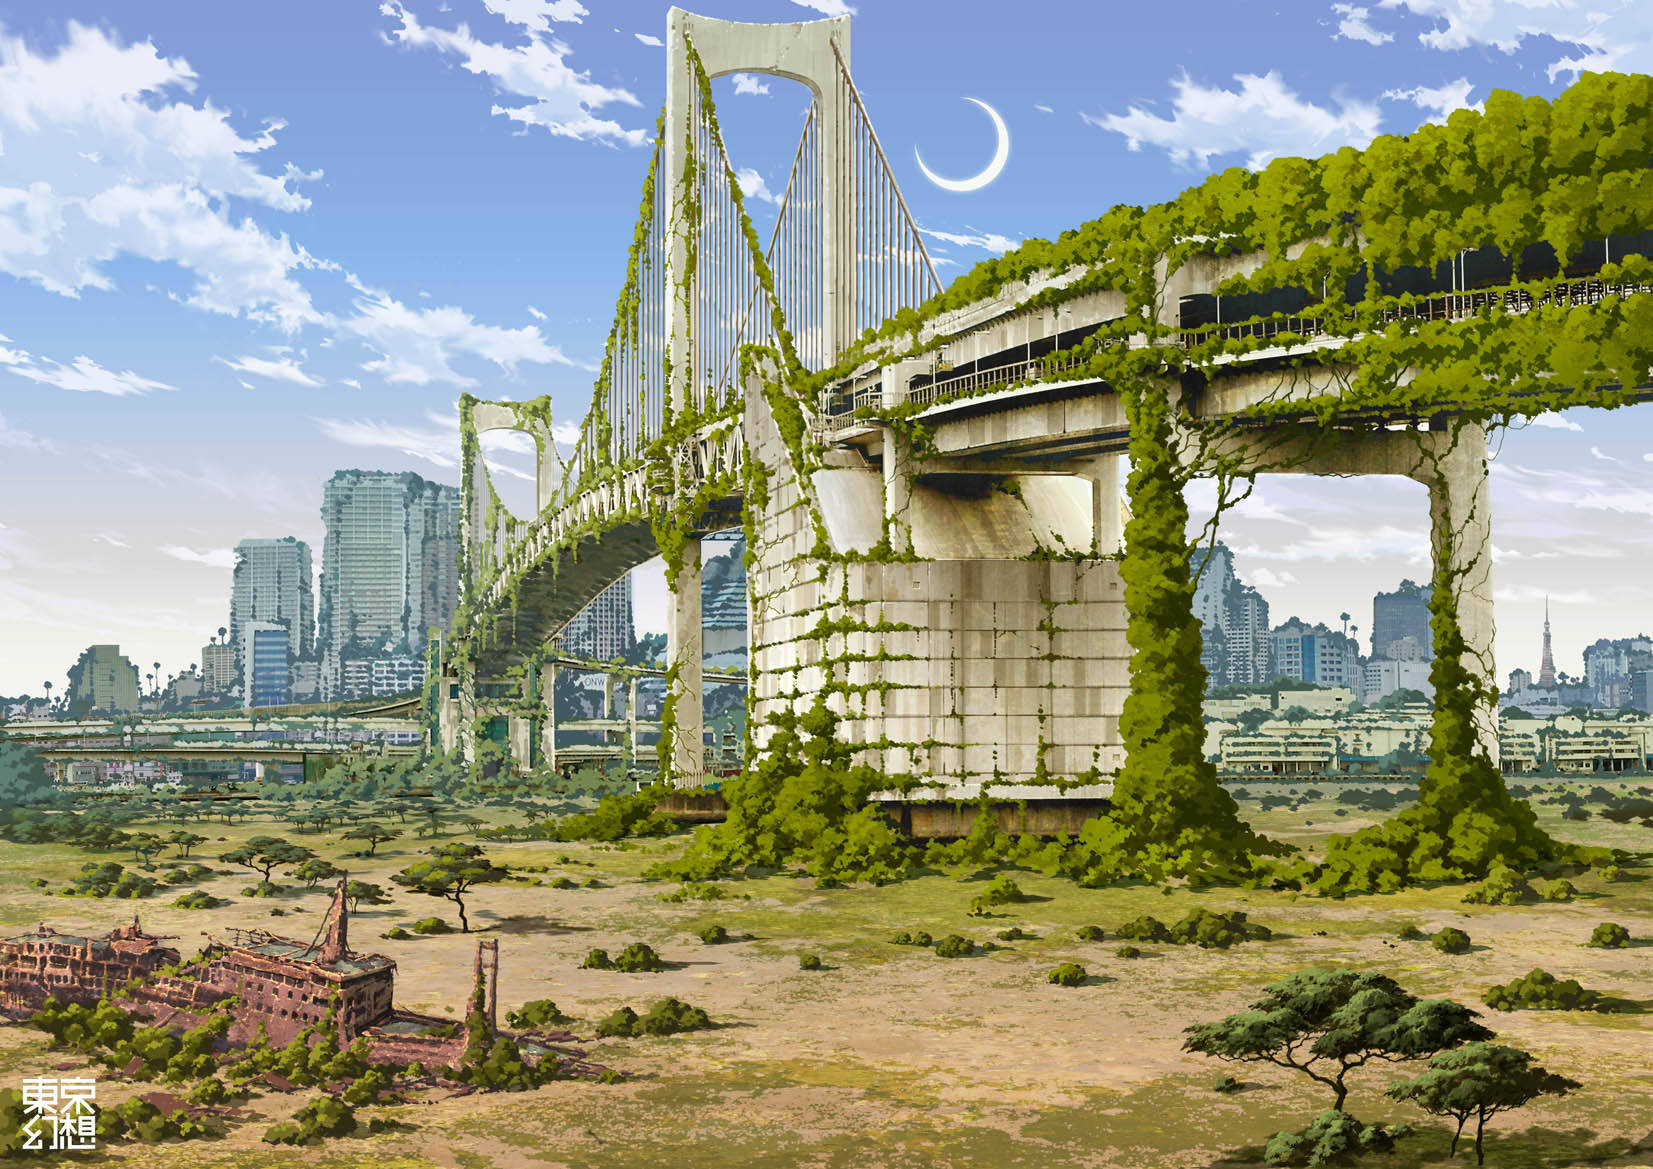 Take A Stroll Through Anime City And Explore Its Historic And Scenic Bridges. Wallpaper